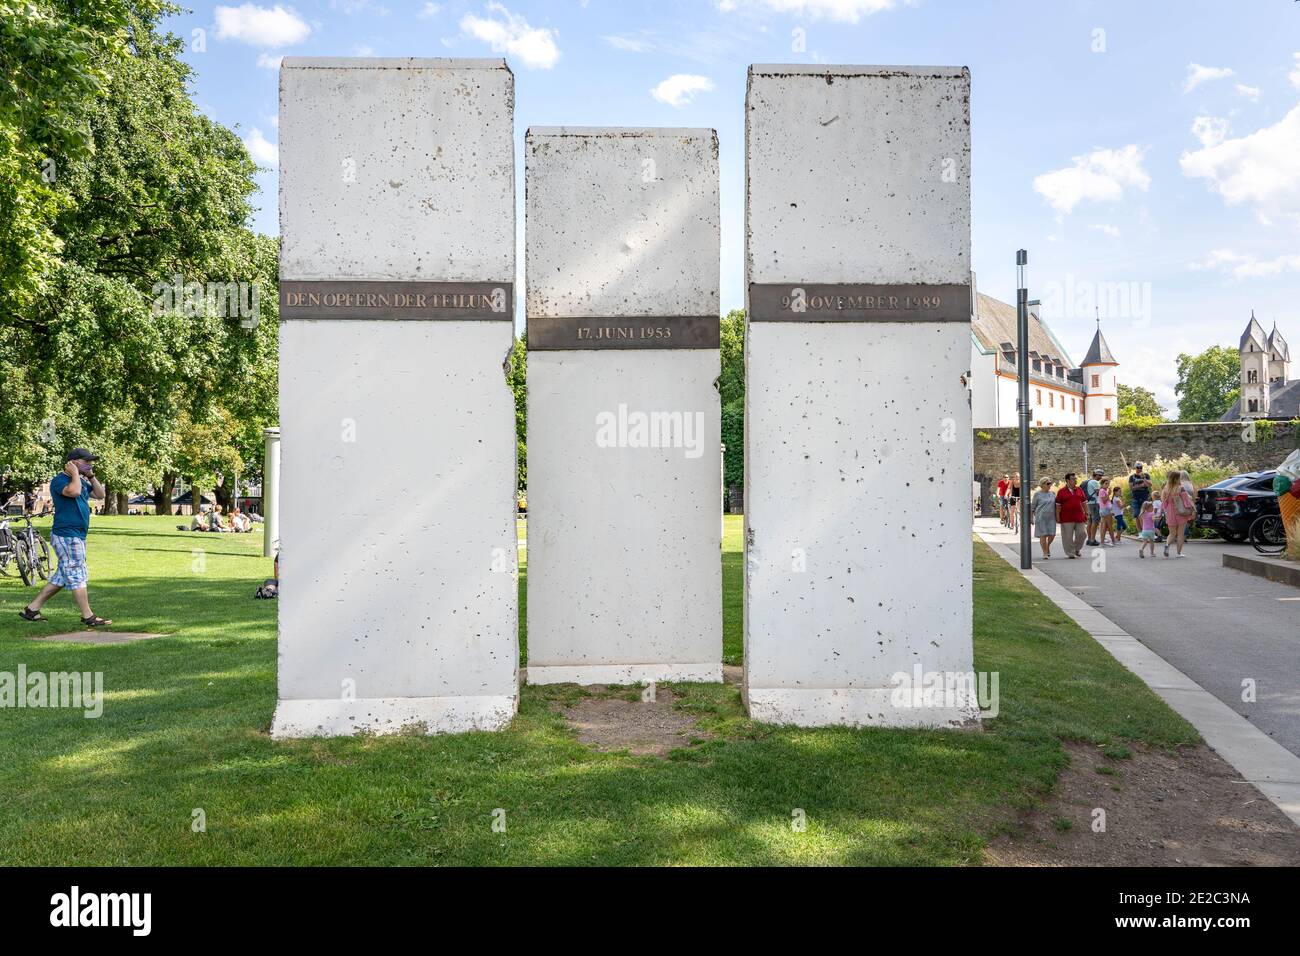 Koblenz, Germany - Aug 1, 2020: 3 monolith of memorial wall in city park Stock Photo